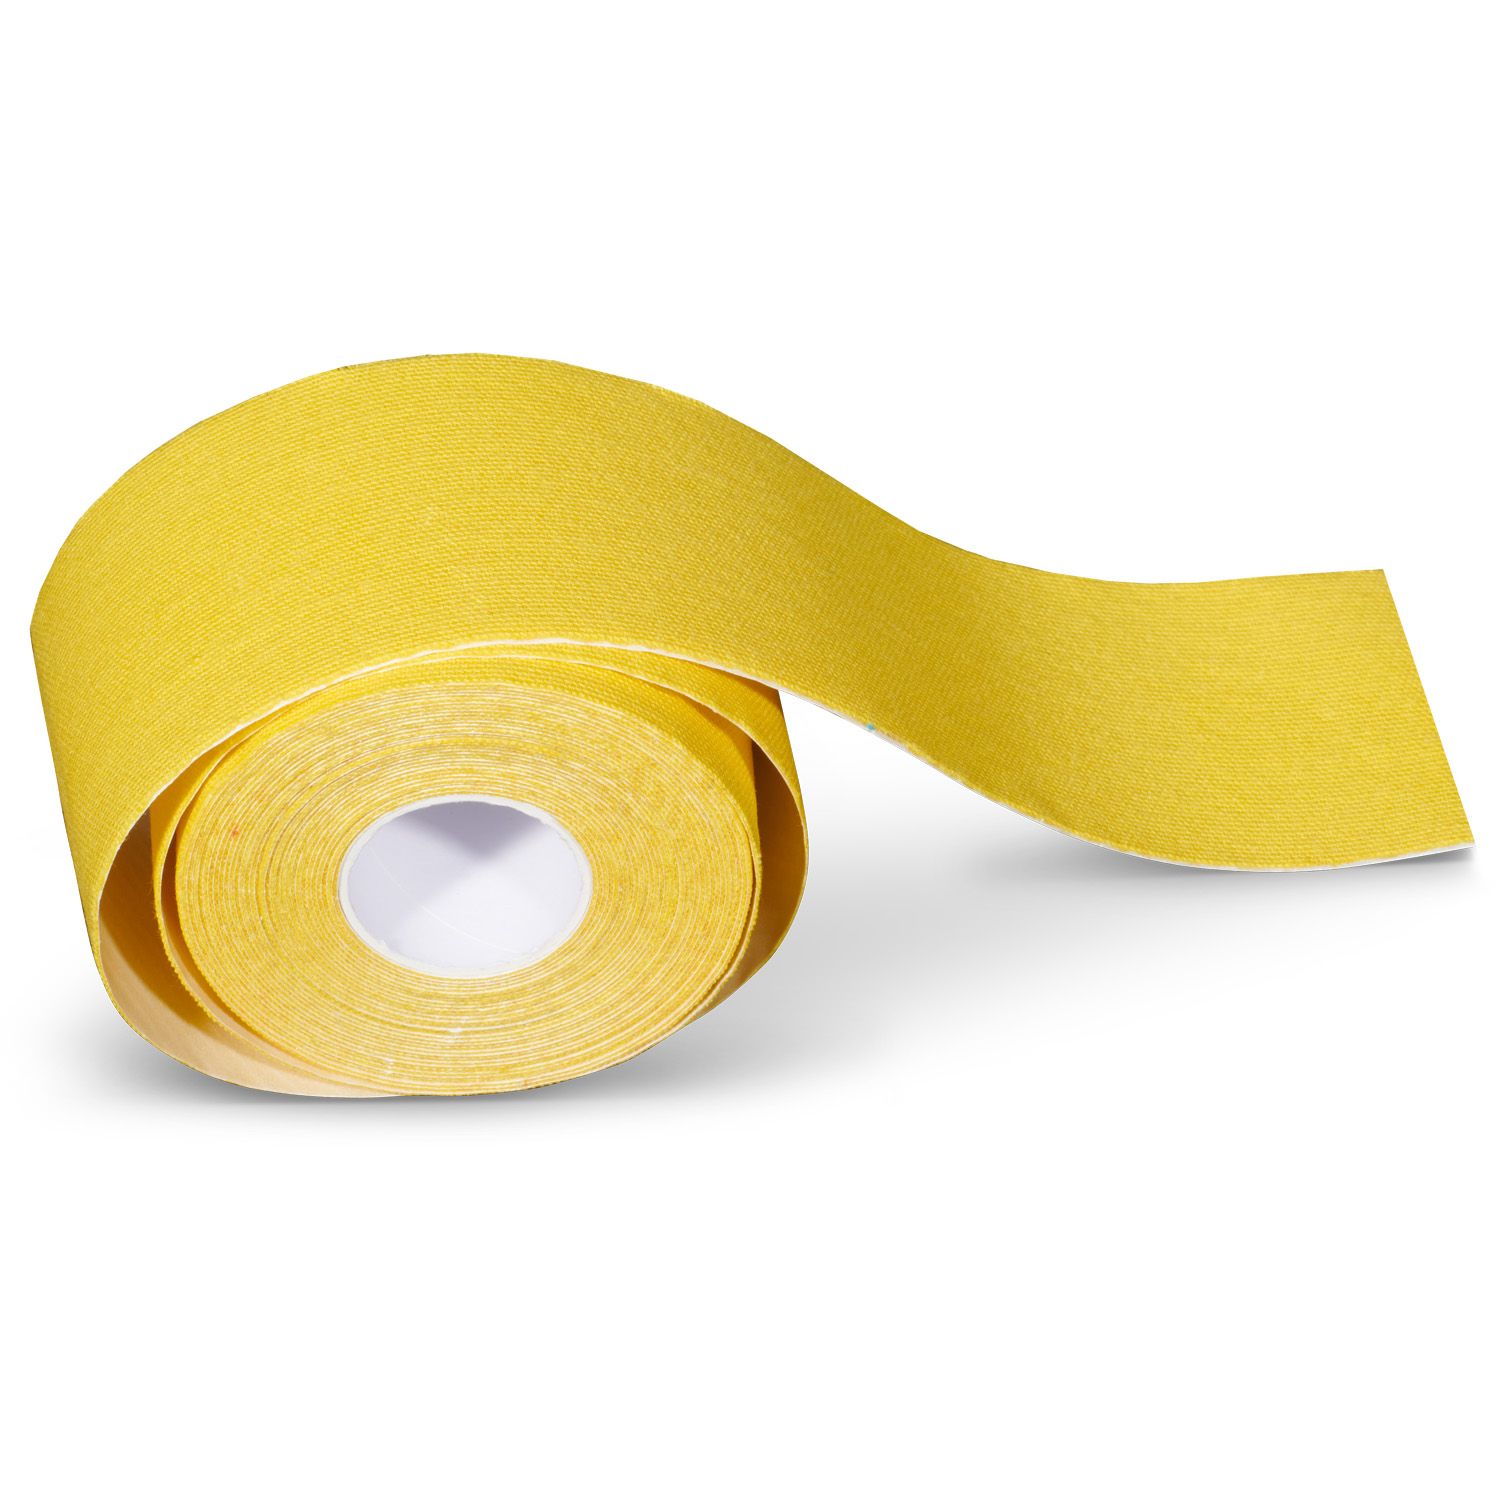 Kinesiology tape 6 rolls plus 2 rolls for free yellow